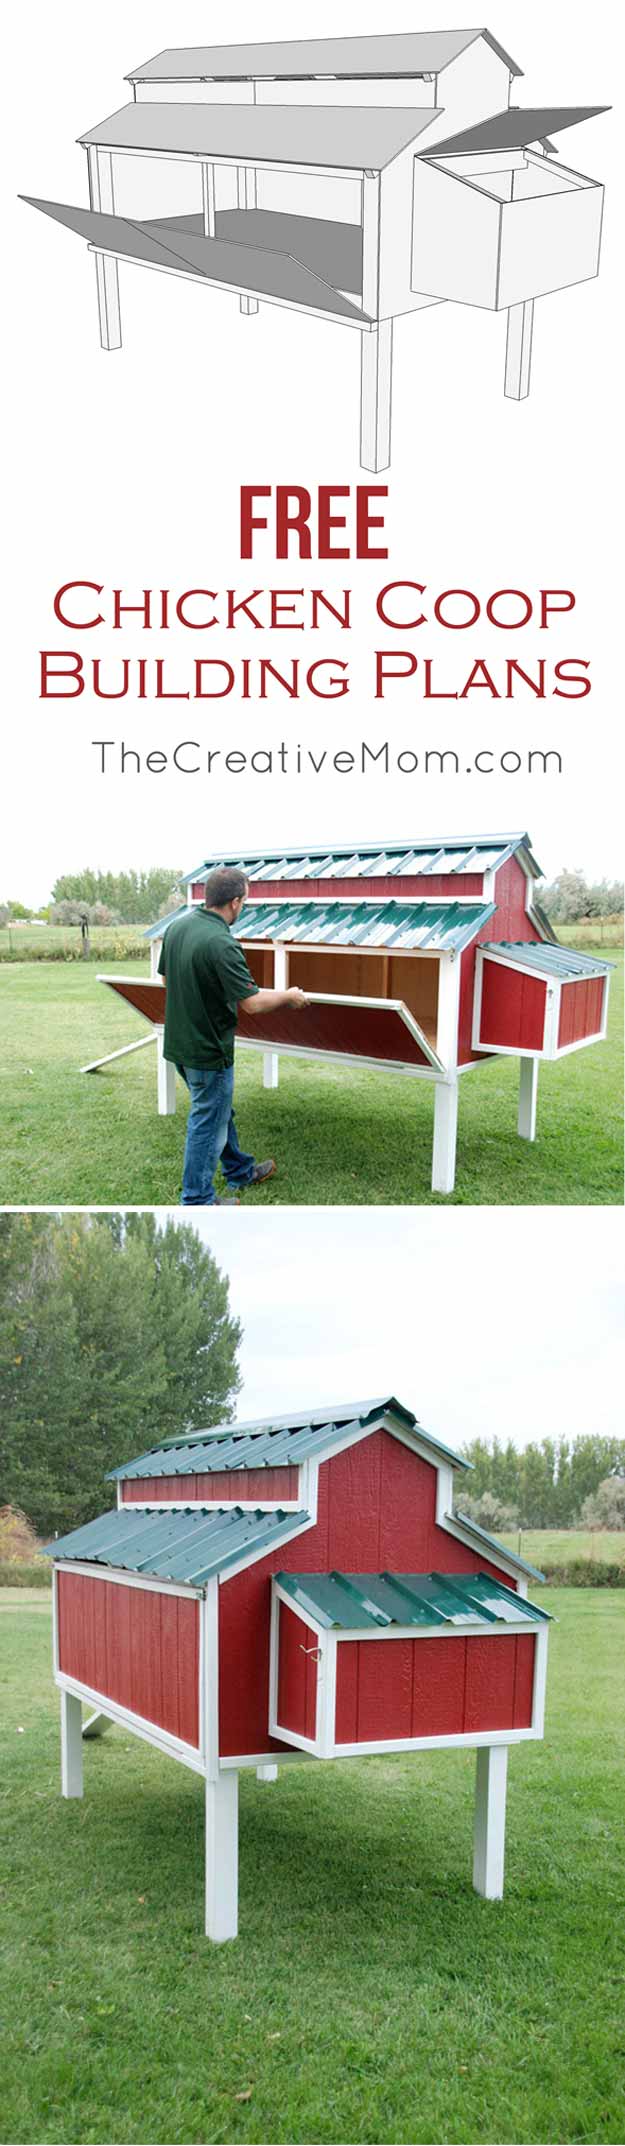 15-more-awesome-chicken-coop-ideas-and-designs-red-chicken-coop